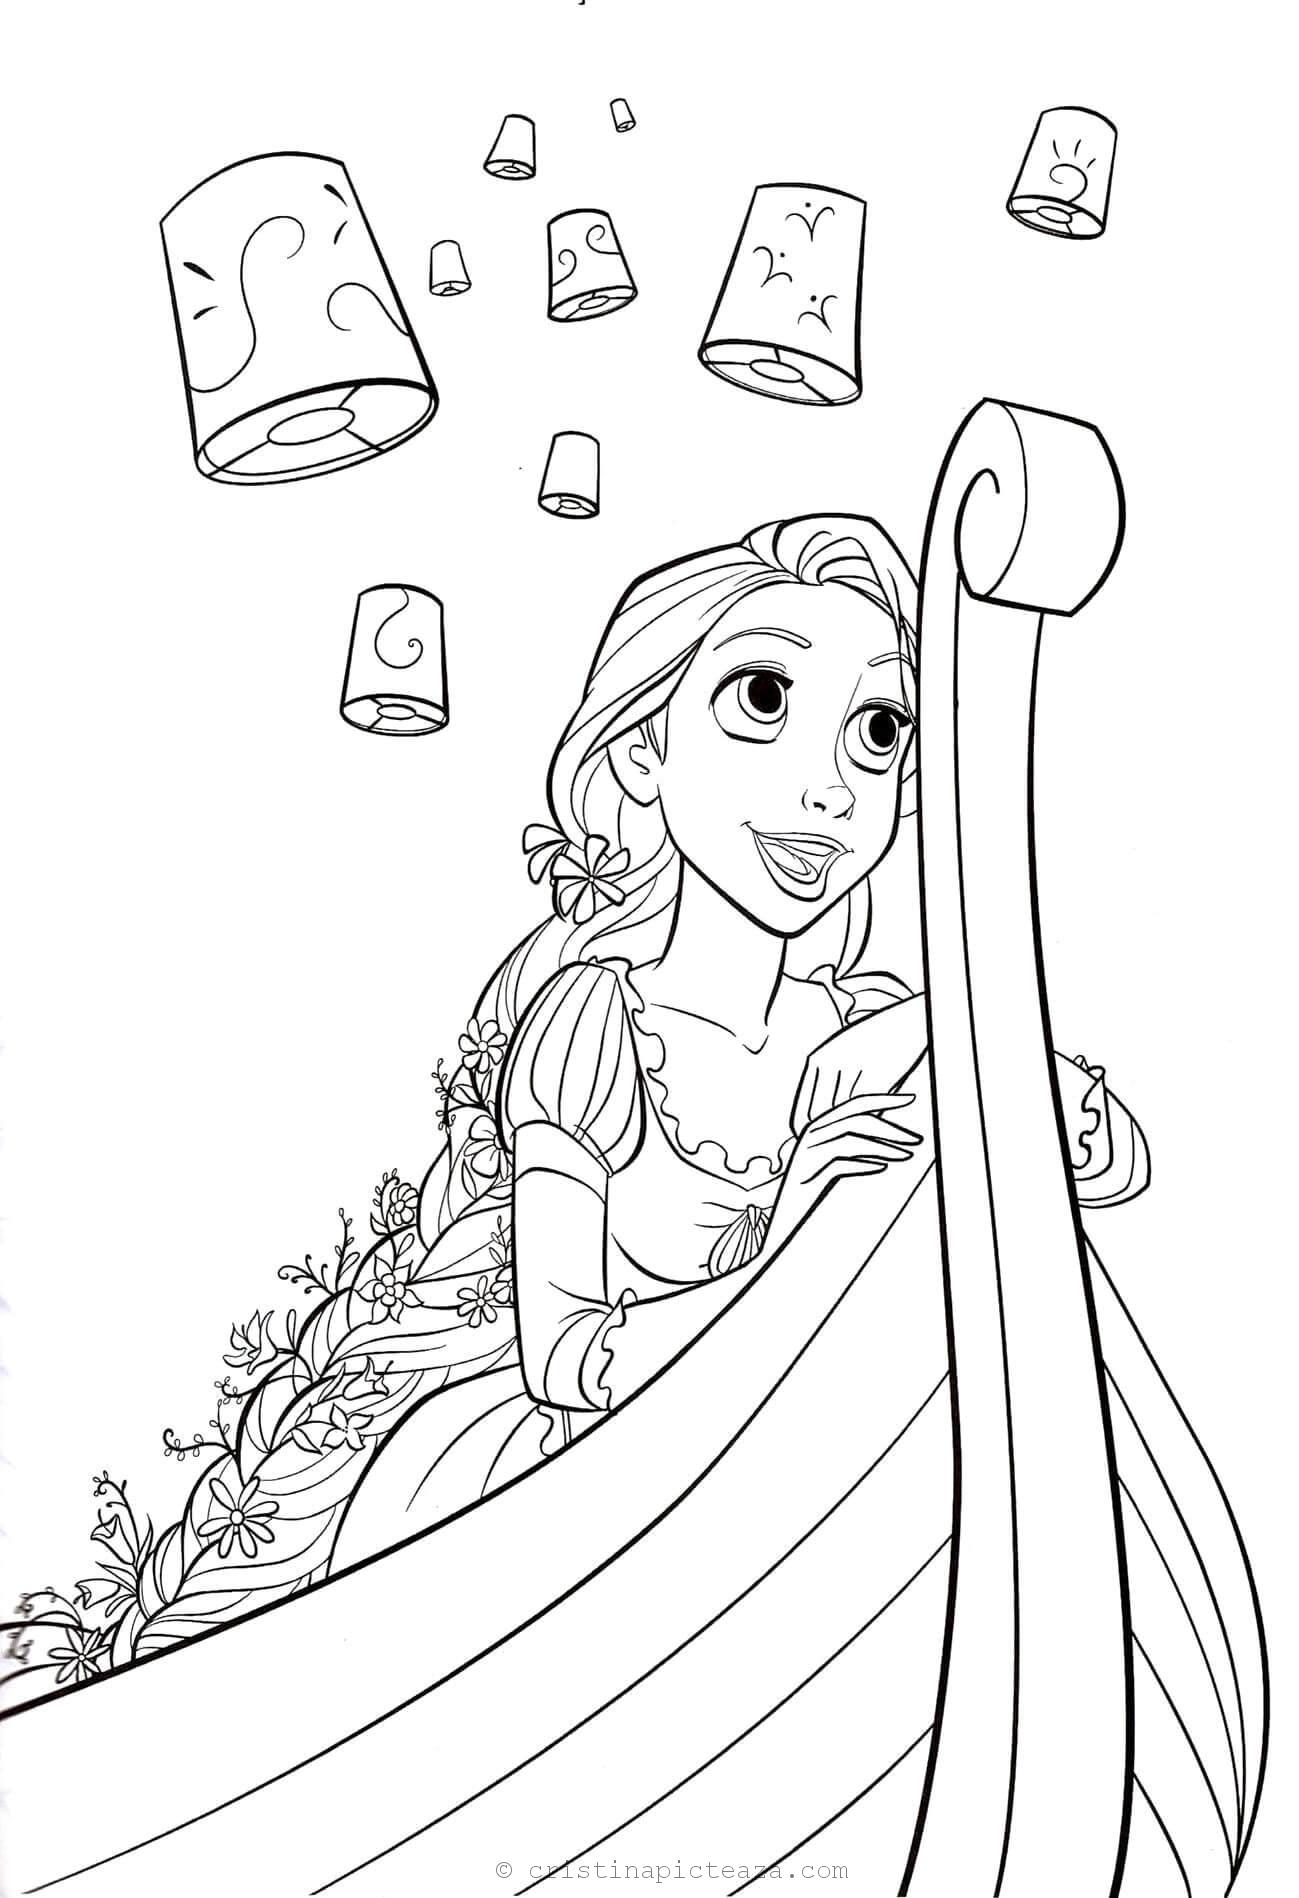 Tangled Coloring Pages - Rapunzel coloring sheets